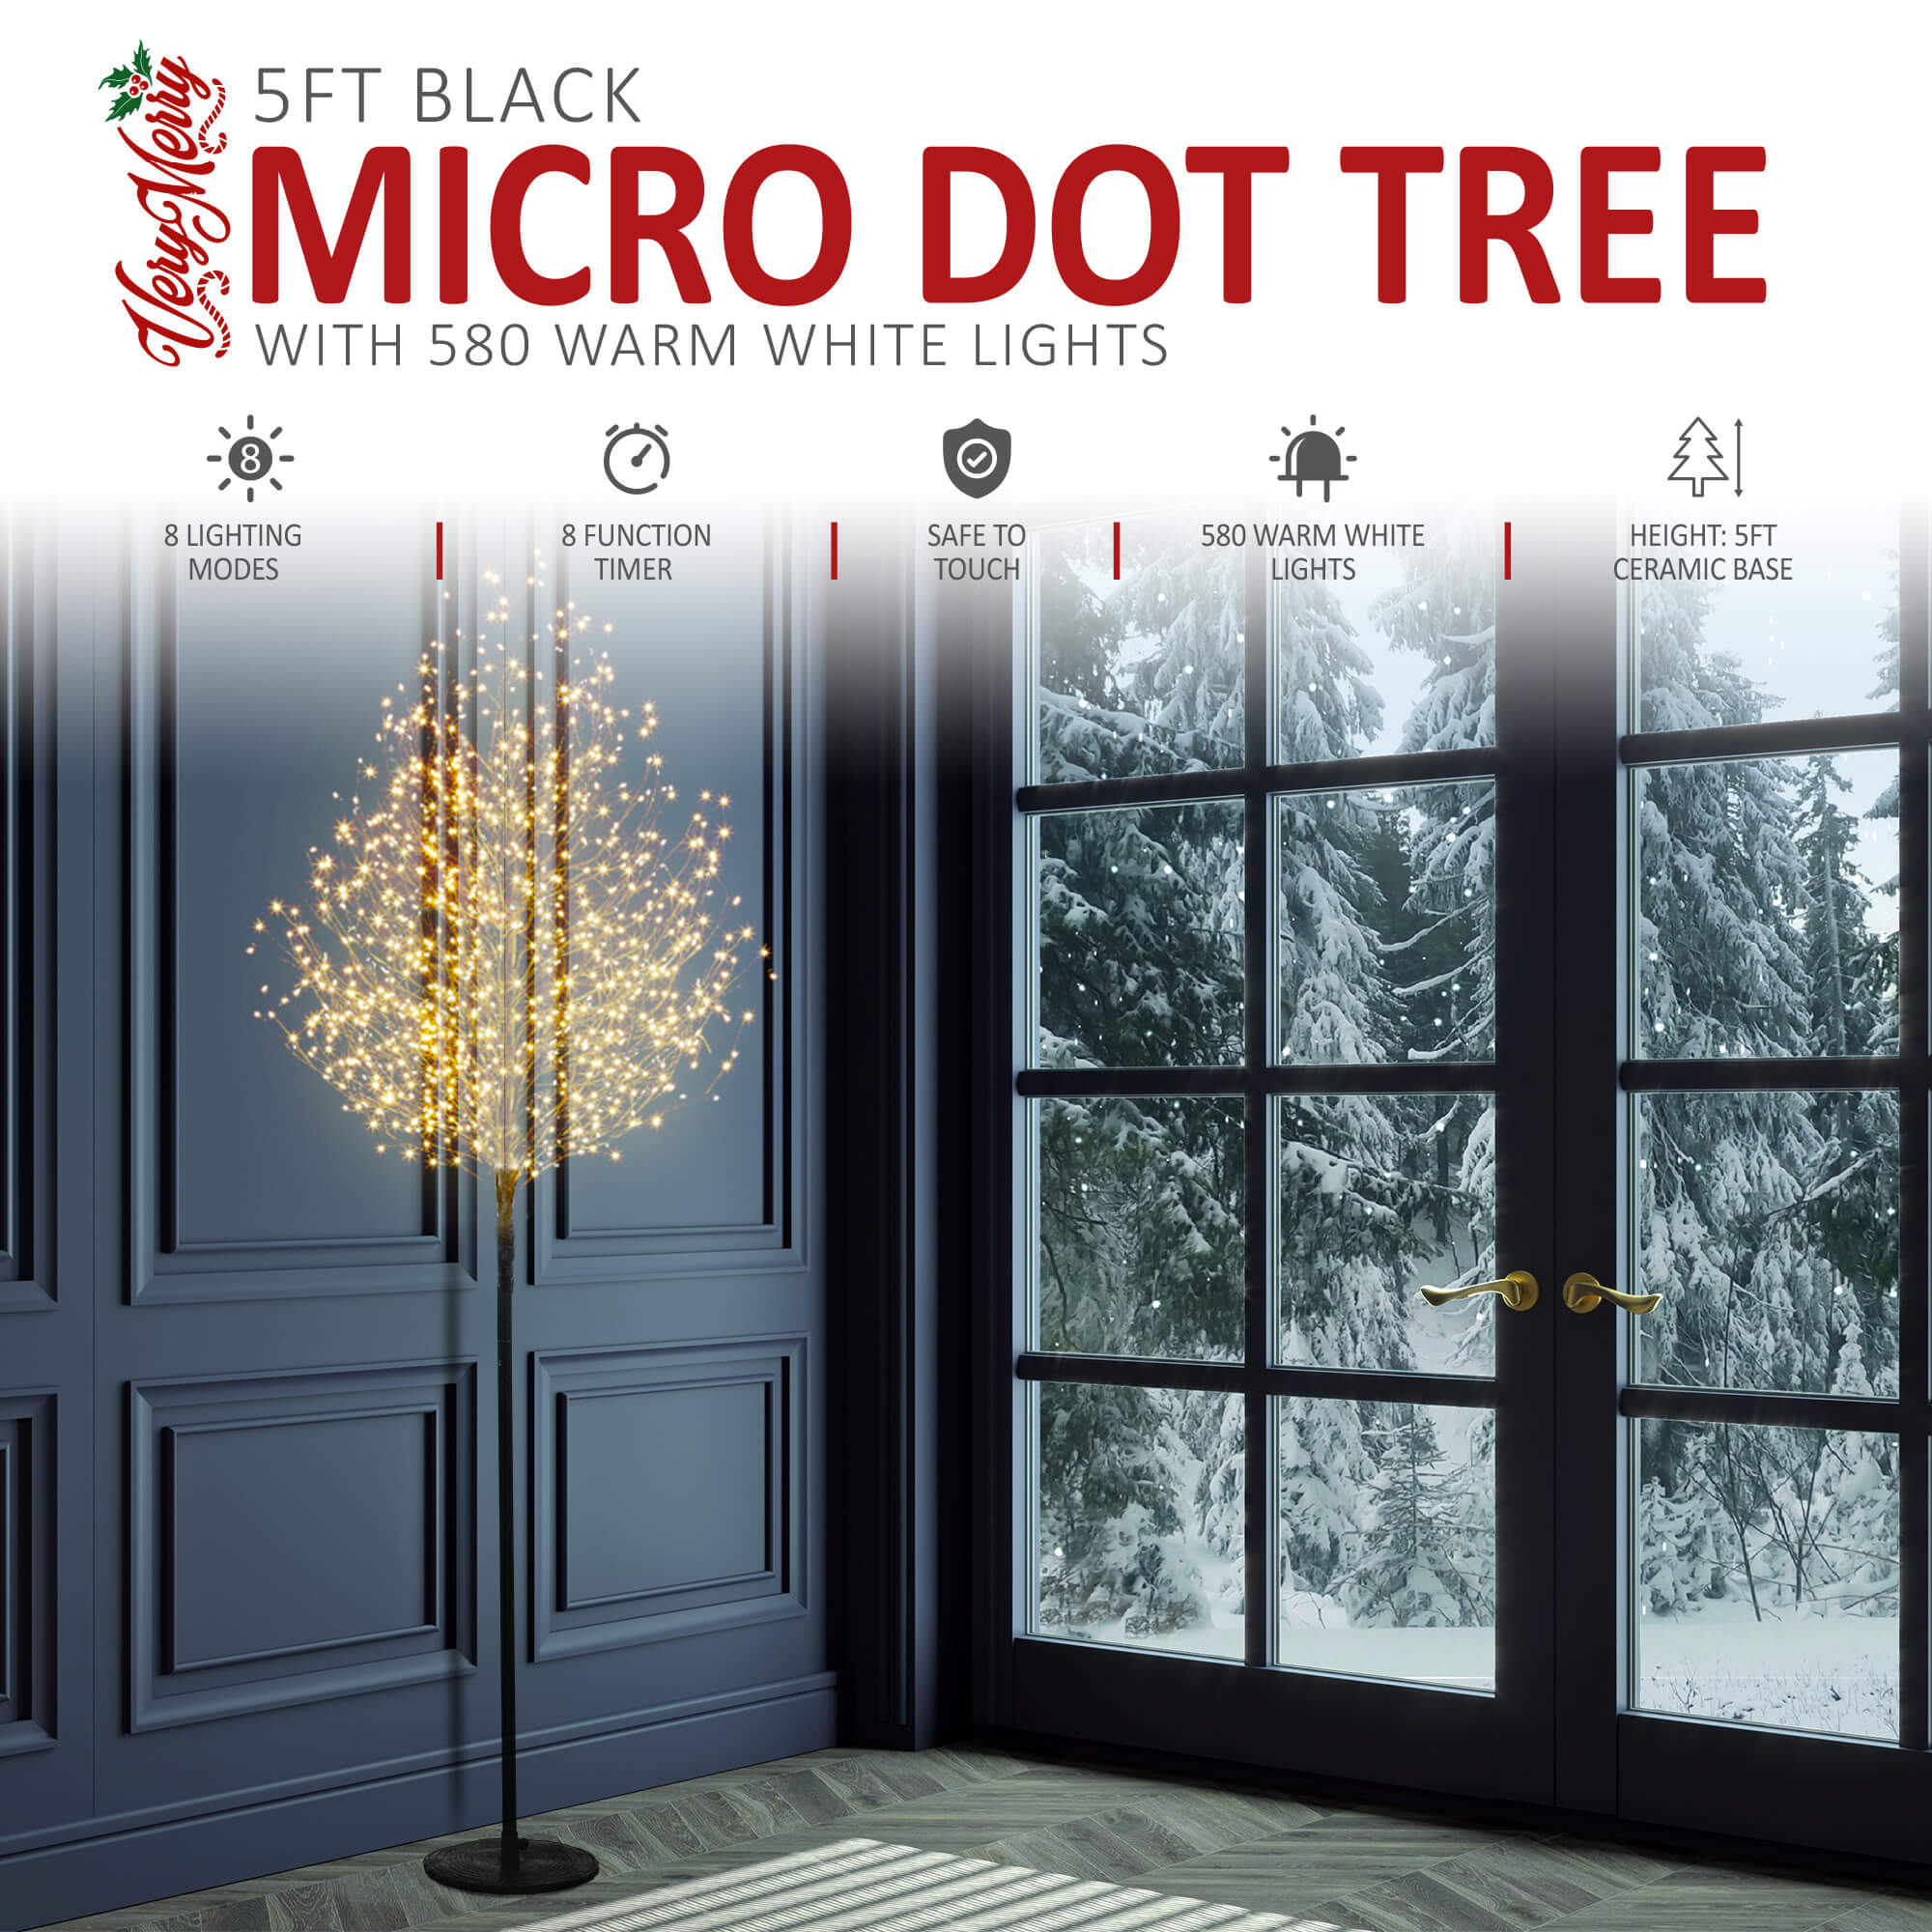 VeryMerry 5FT Micro Dot Birch Pre-Lit Christmas Tree with 580 LED Warm White Lights - Black